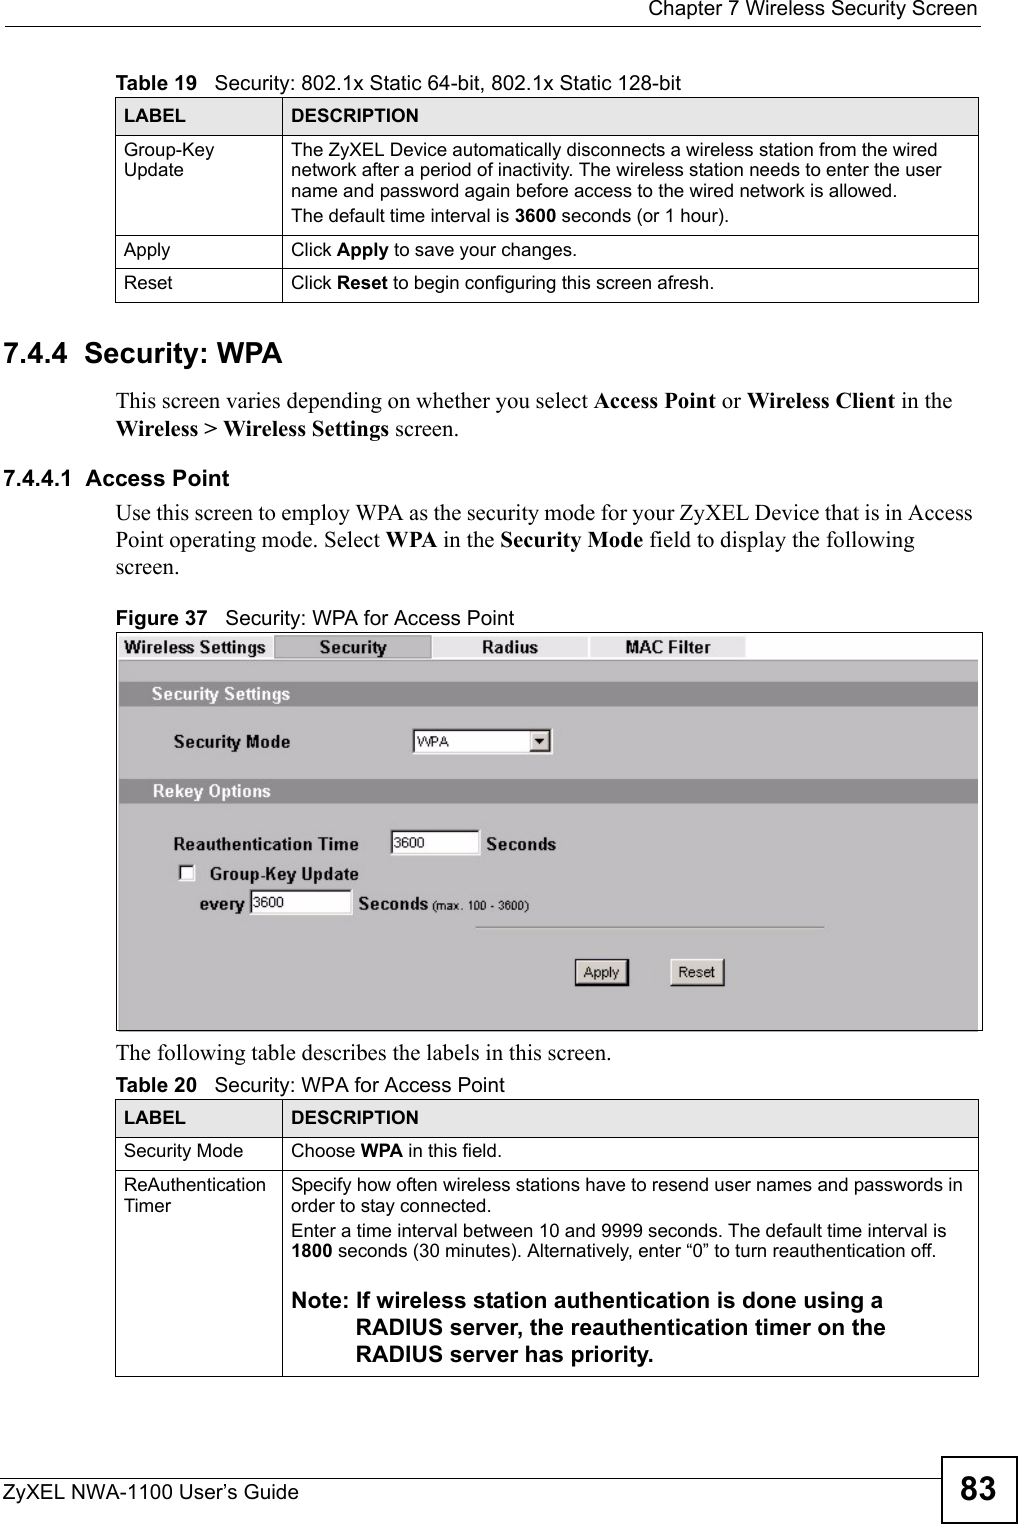  Chapter 7 Wireless Security ScreenZyXEL NWA-1100 User’s Guide 837.4.4  Security: WPAThis screen varies depending on whether you select Access Point or Wireless Client in the Wireless &gt; Wireless Settings screen.7.4.4.1  Access PointUse this screen to employ WPA as the security mode for your ZyXEL Device that is in Access Point operating mode. Select WPA in the Security Mode field to display the following screen.Figure 37   Security: WPA for Access Point The following table describes the labels in this screen.Group-Key UpdateThe ZyXEL Device automatically disconnects a wireless station from the wired network after a period of inactivity. The wireless station needs to enter the user name and password again before access to the wired network is allowed. The default time interval is 3600 seconds (or 1 hour).Apply Click Apply to save your changes.Reset Click Reset to begin configuring this screen afresh.Table 19   Security: 802.1x Static 64-bit, 802.1x Static 128-bitLABEL DESCRIPTIONTable 20   Security: WPA for Access PointLABEL DESCRIPTIONSecurity Mode Choose WPA in this field.ReAuthentication Timer Specify how often wireless stations have to resend user names and passwords in order to stay connected. Enter a time interval between 10 and 9999 seconds. The default time interval is 1800 seconds (30 minutes). Alternatively, enter “0” to turn reauthentication off. Note: If wireless station authentication is done using a RADIUS server, the reauthentication timer on the RADIUS server has priority. 